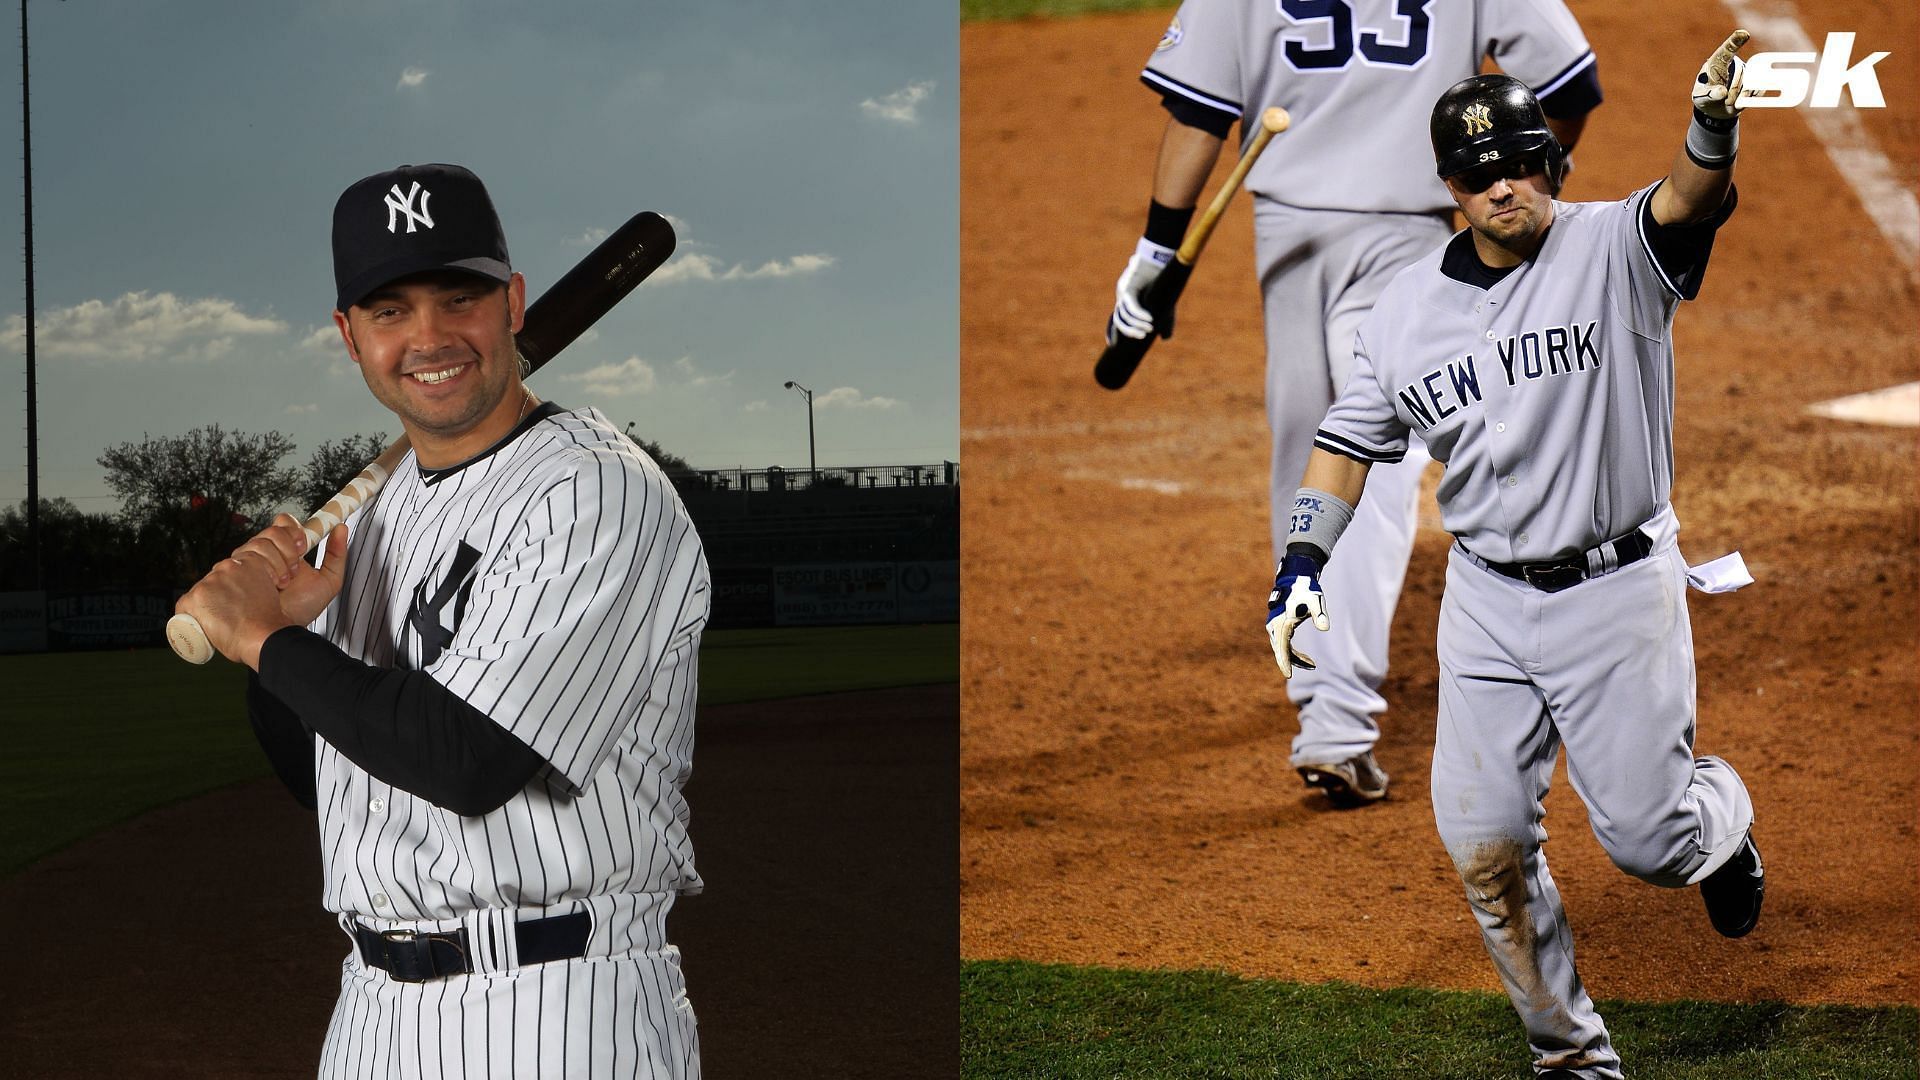 Looking back at the time when former MLB star Nick Swisher shared